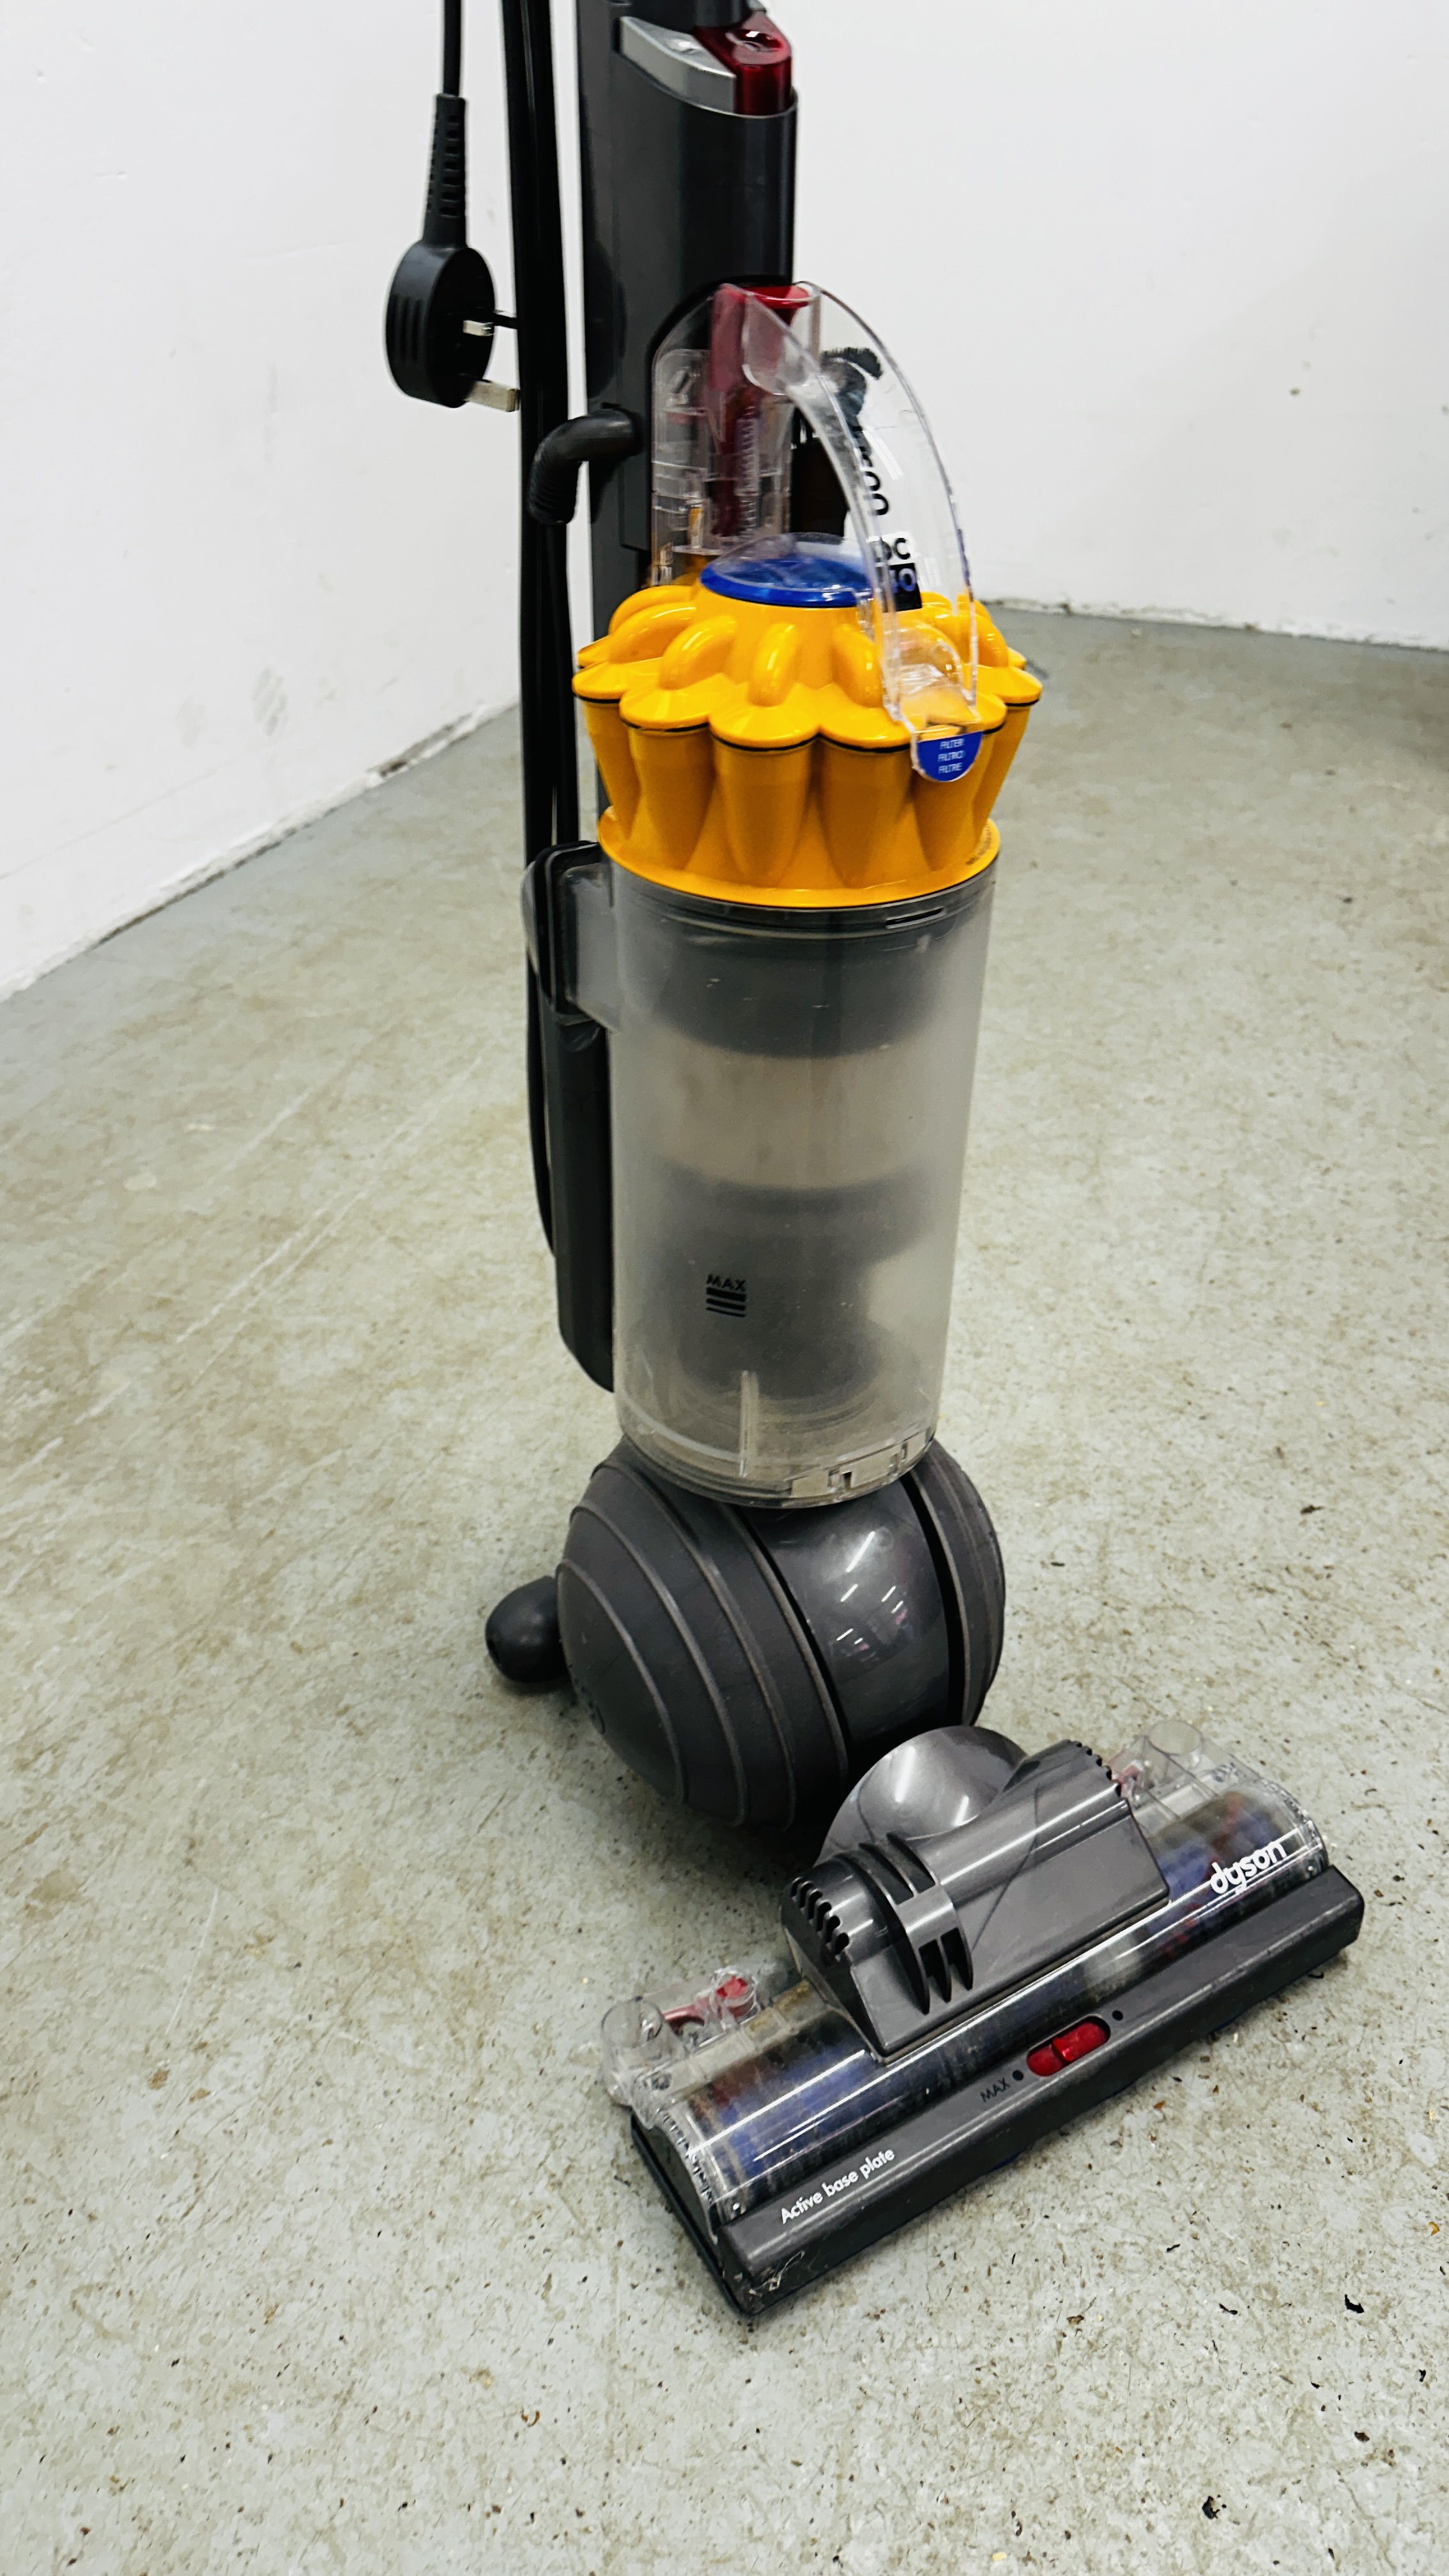 A DYSON DC 40 UPRIGHT VACUUM CLEANER - SOLD AS SEEN. - Bild 5 aus 5